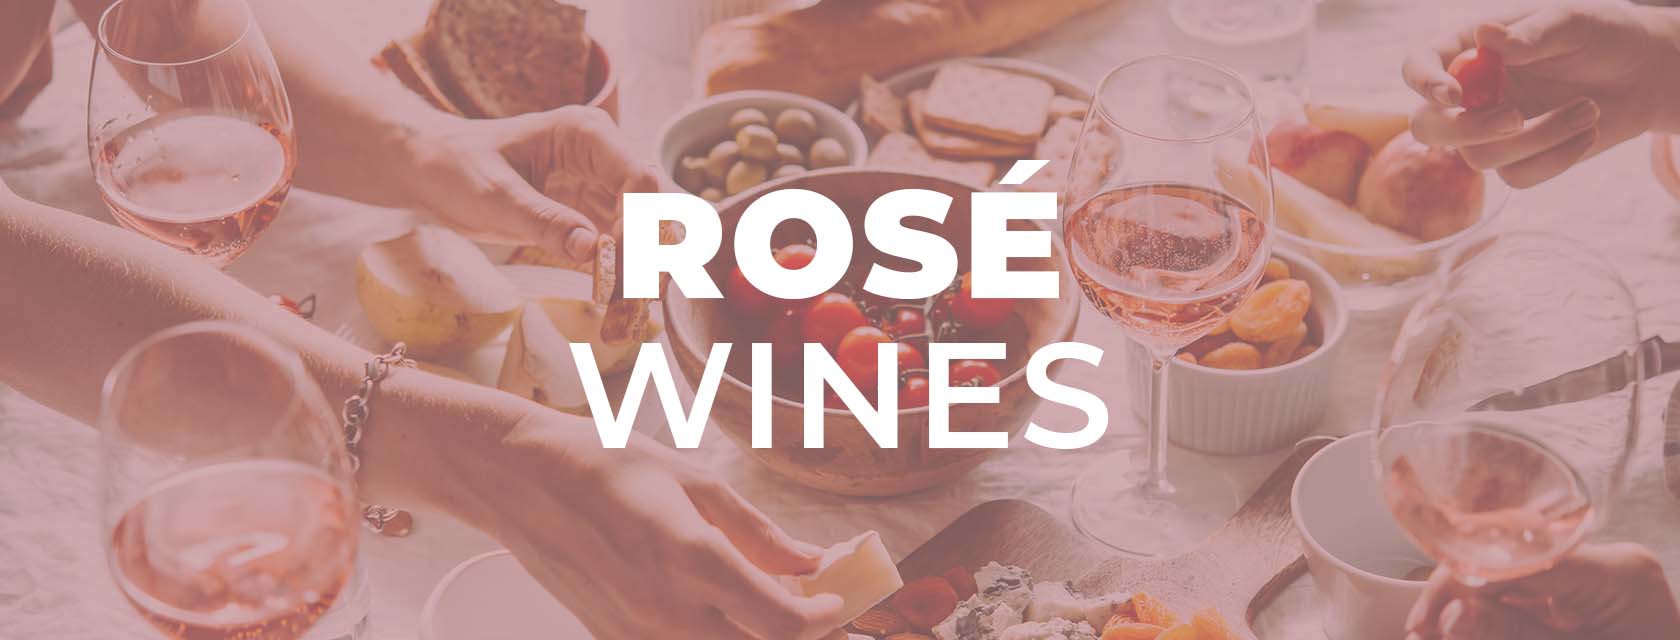 Rose Wines Banner Image